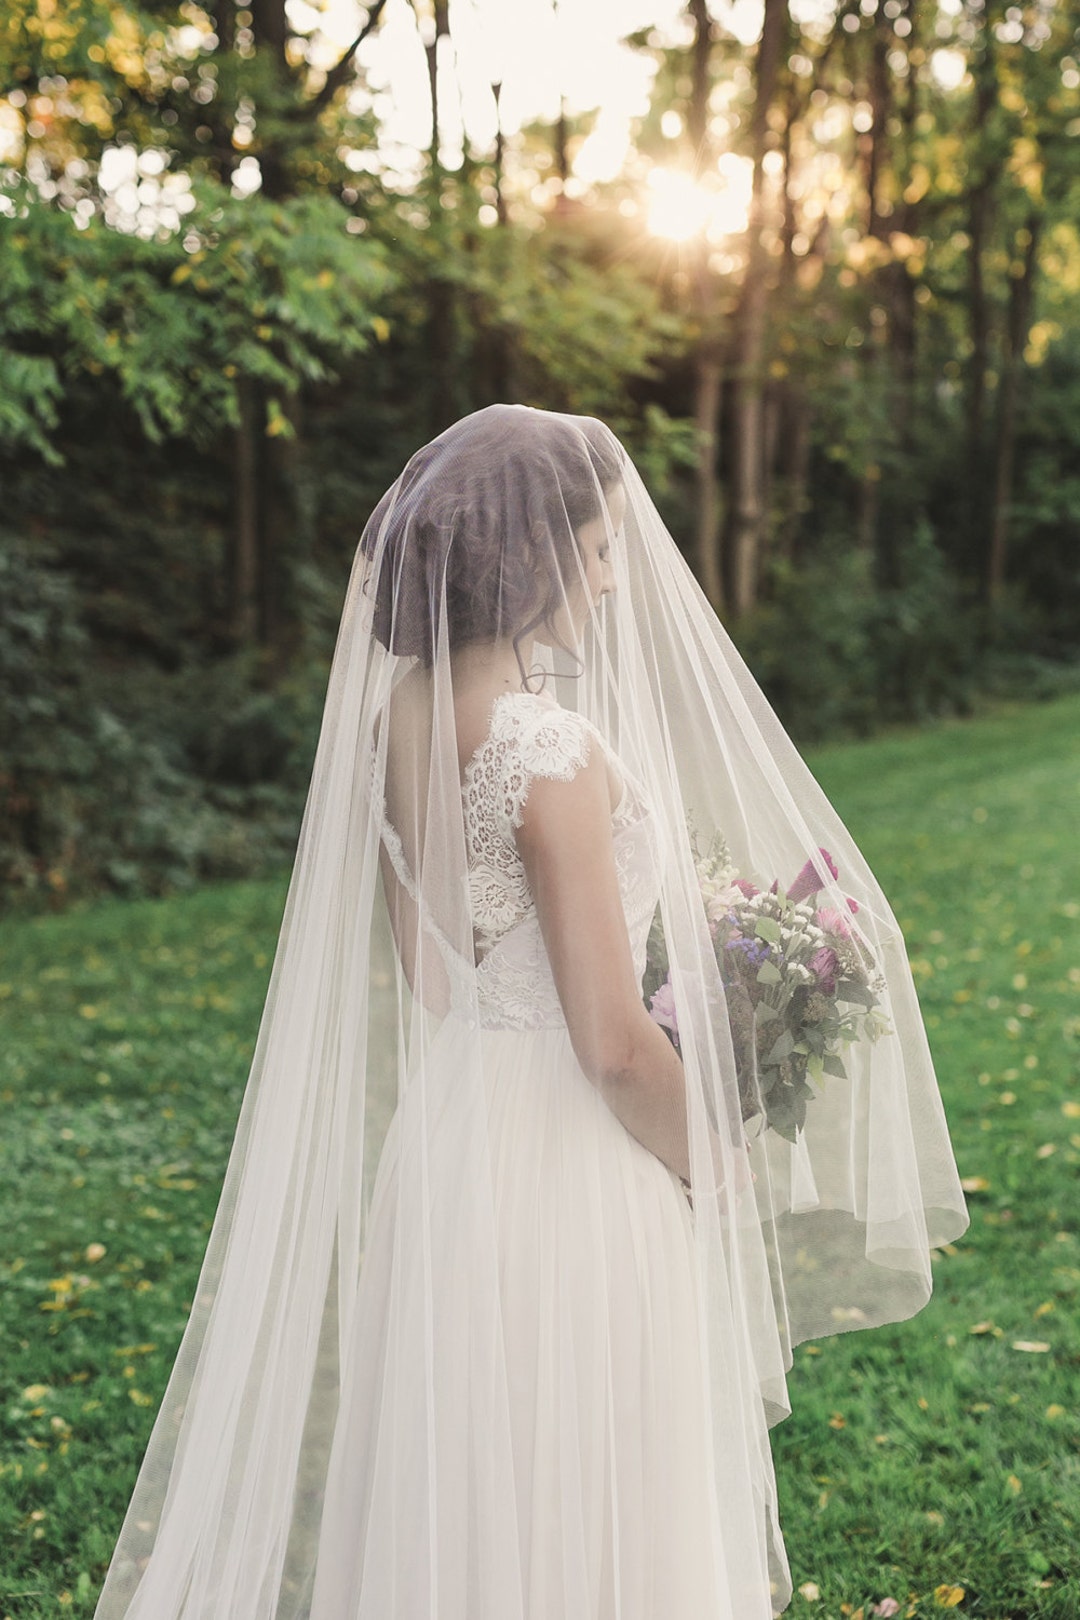 Wedding Veils Chapel Cathedral Veil Length 108 Cascading Two Tier With  Blusher Over the Face Flowy  Abusymother Wedding Veils 